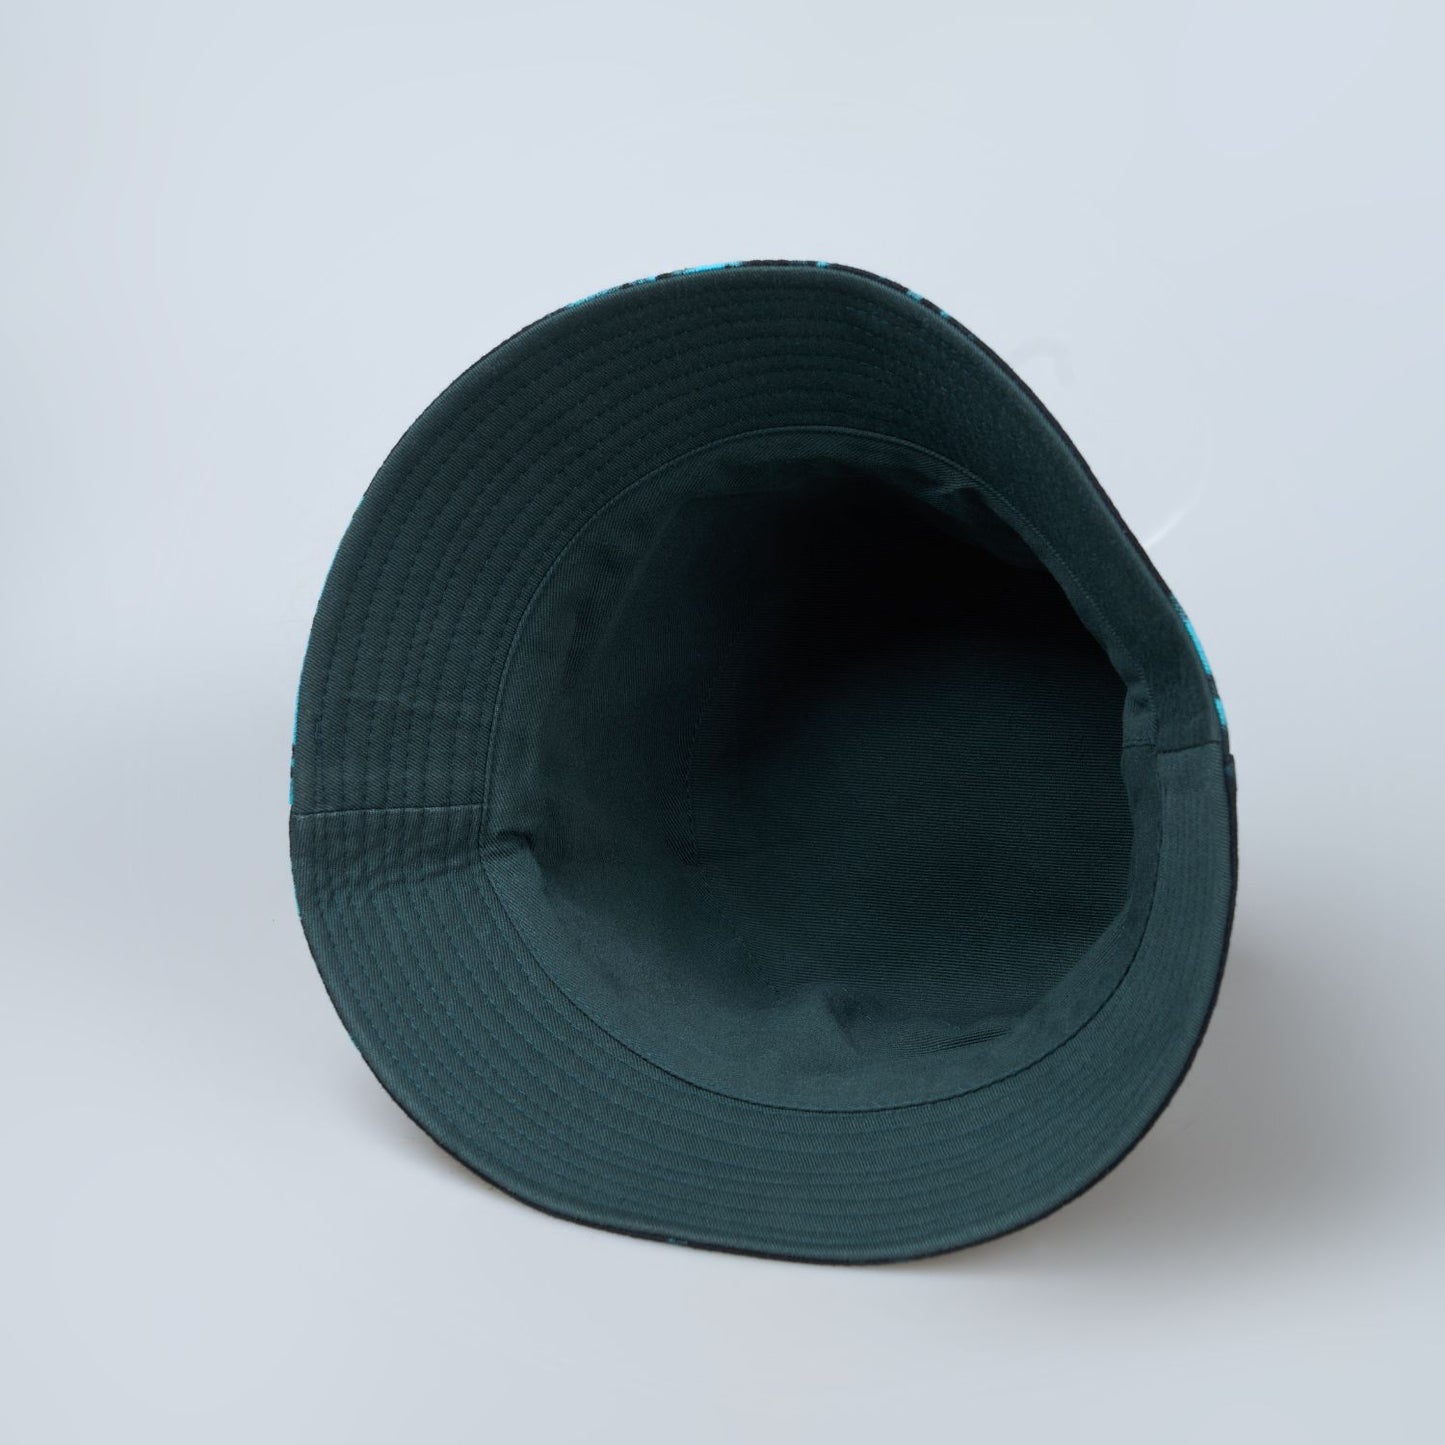 Blue and green colored, lightweight bucket hat for men, inside view.